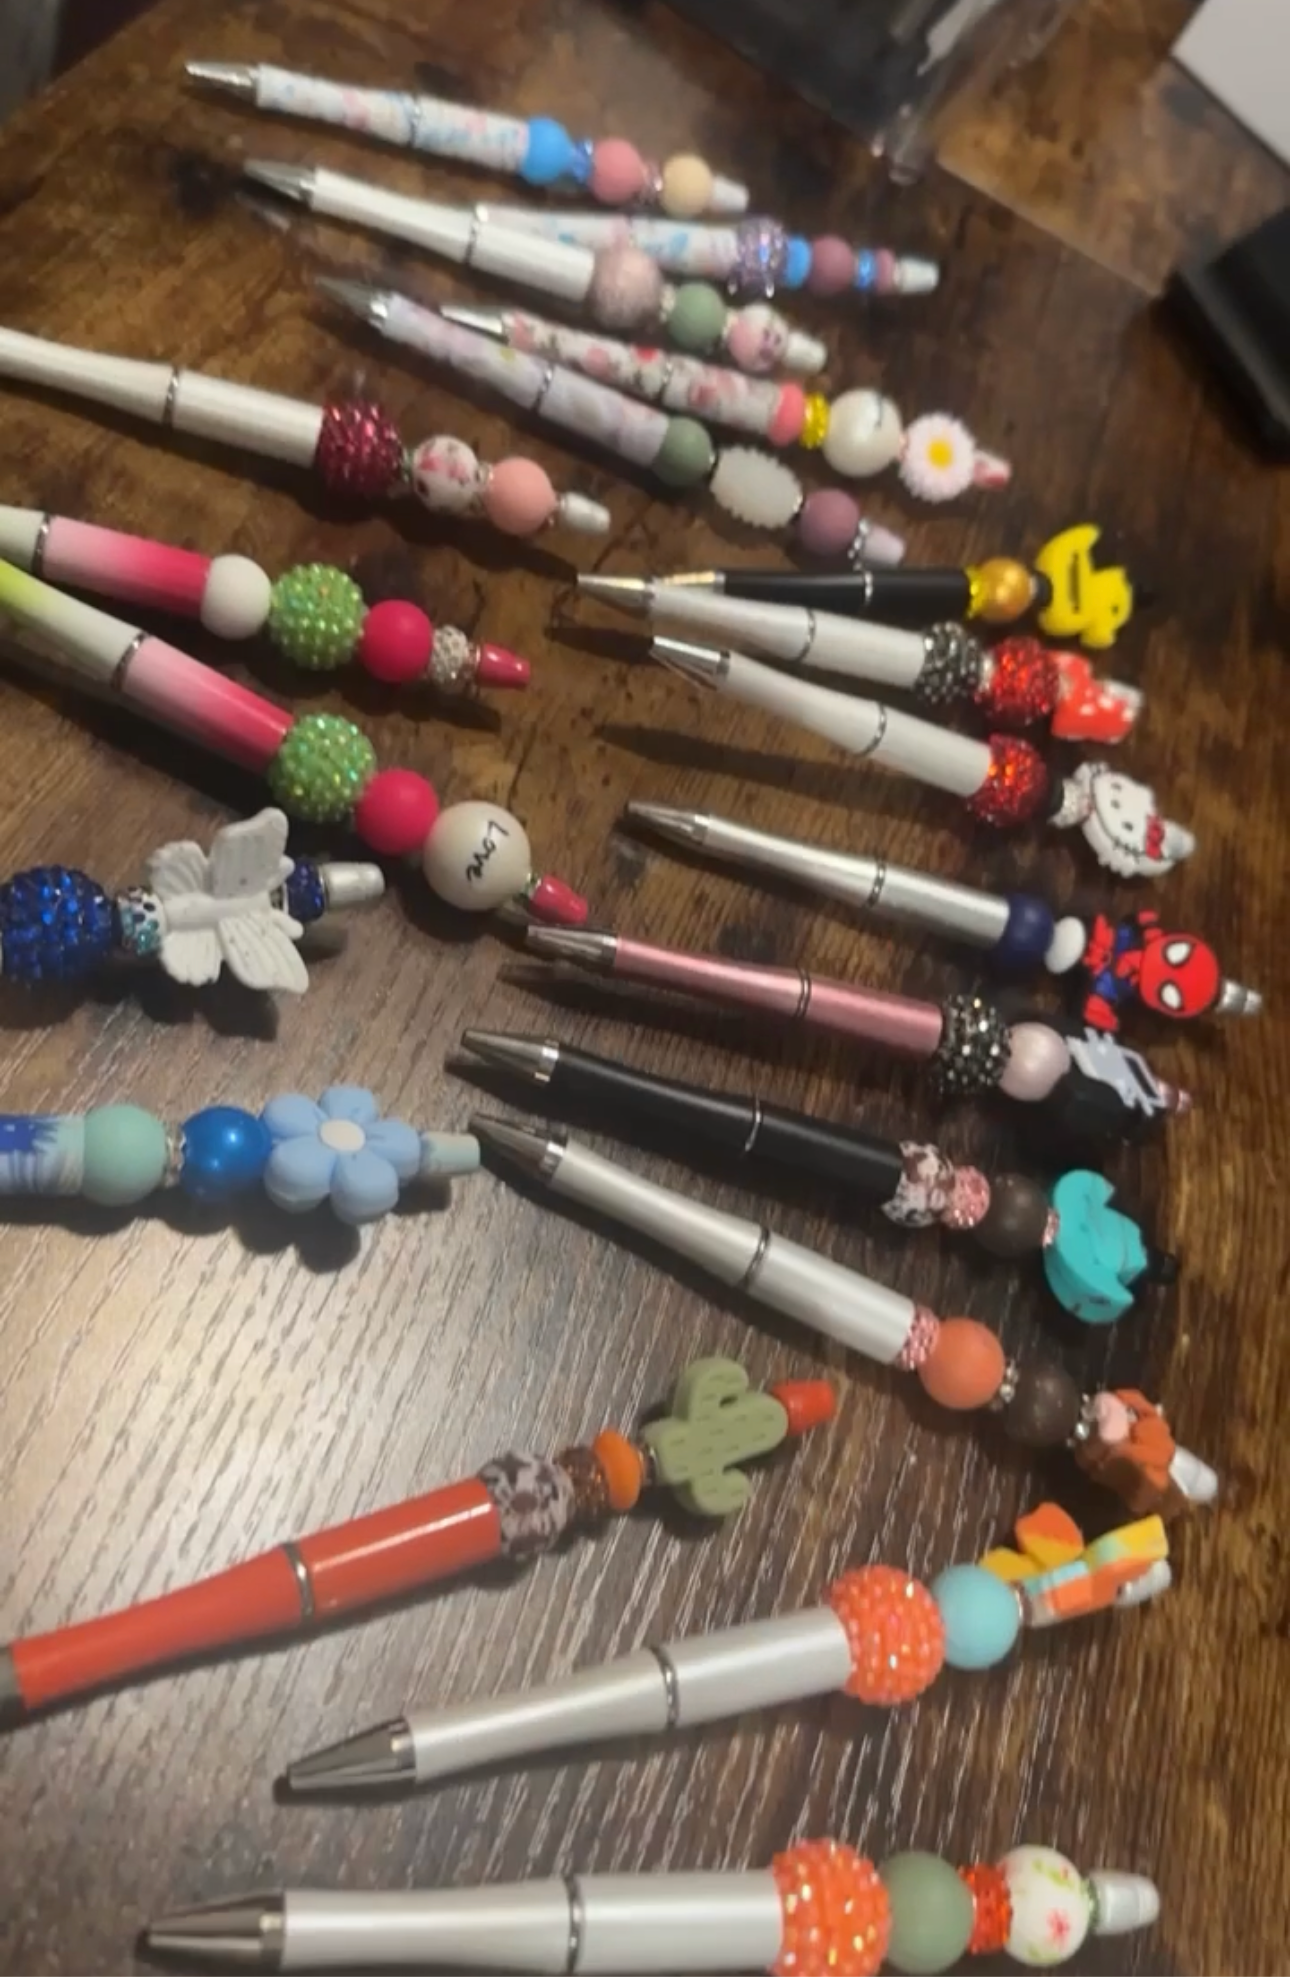 Focal Beads For Pens